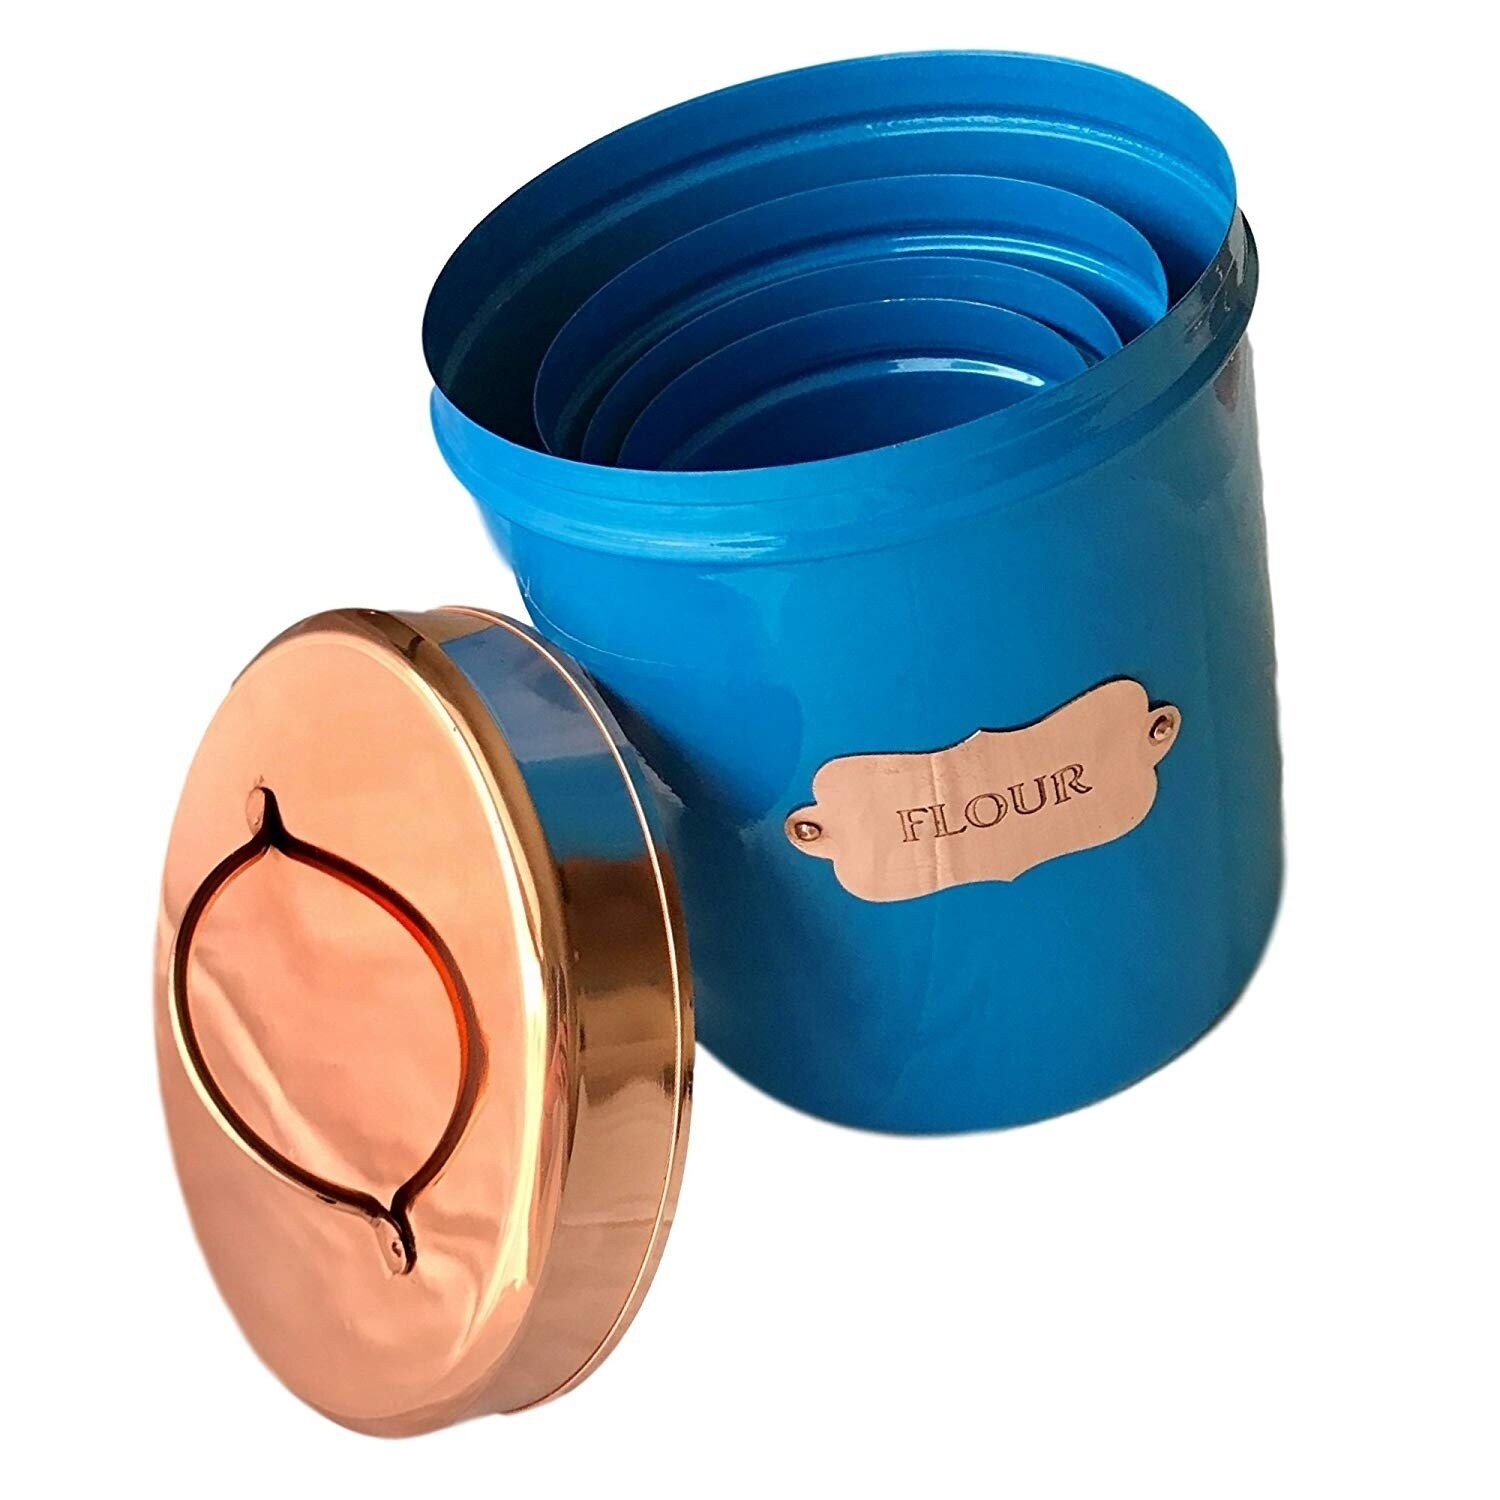 https://ak1.ostkcdn.com/images/products/20229173/Copper-Kitchen-Food-Canister-Set-of-4-by-Kauri-Design-6a4f2197-3d20-47b4-b1fa-dba4a3a08c48.jpg